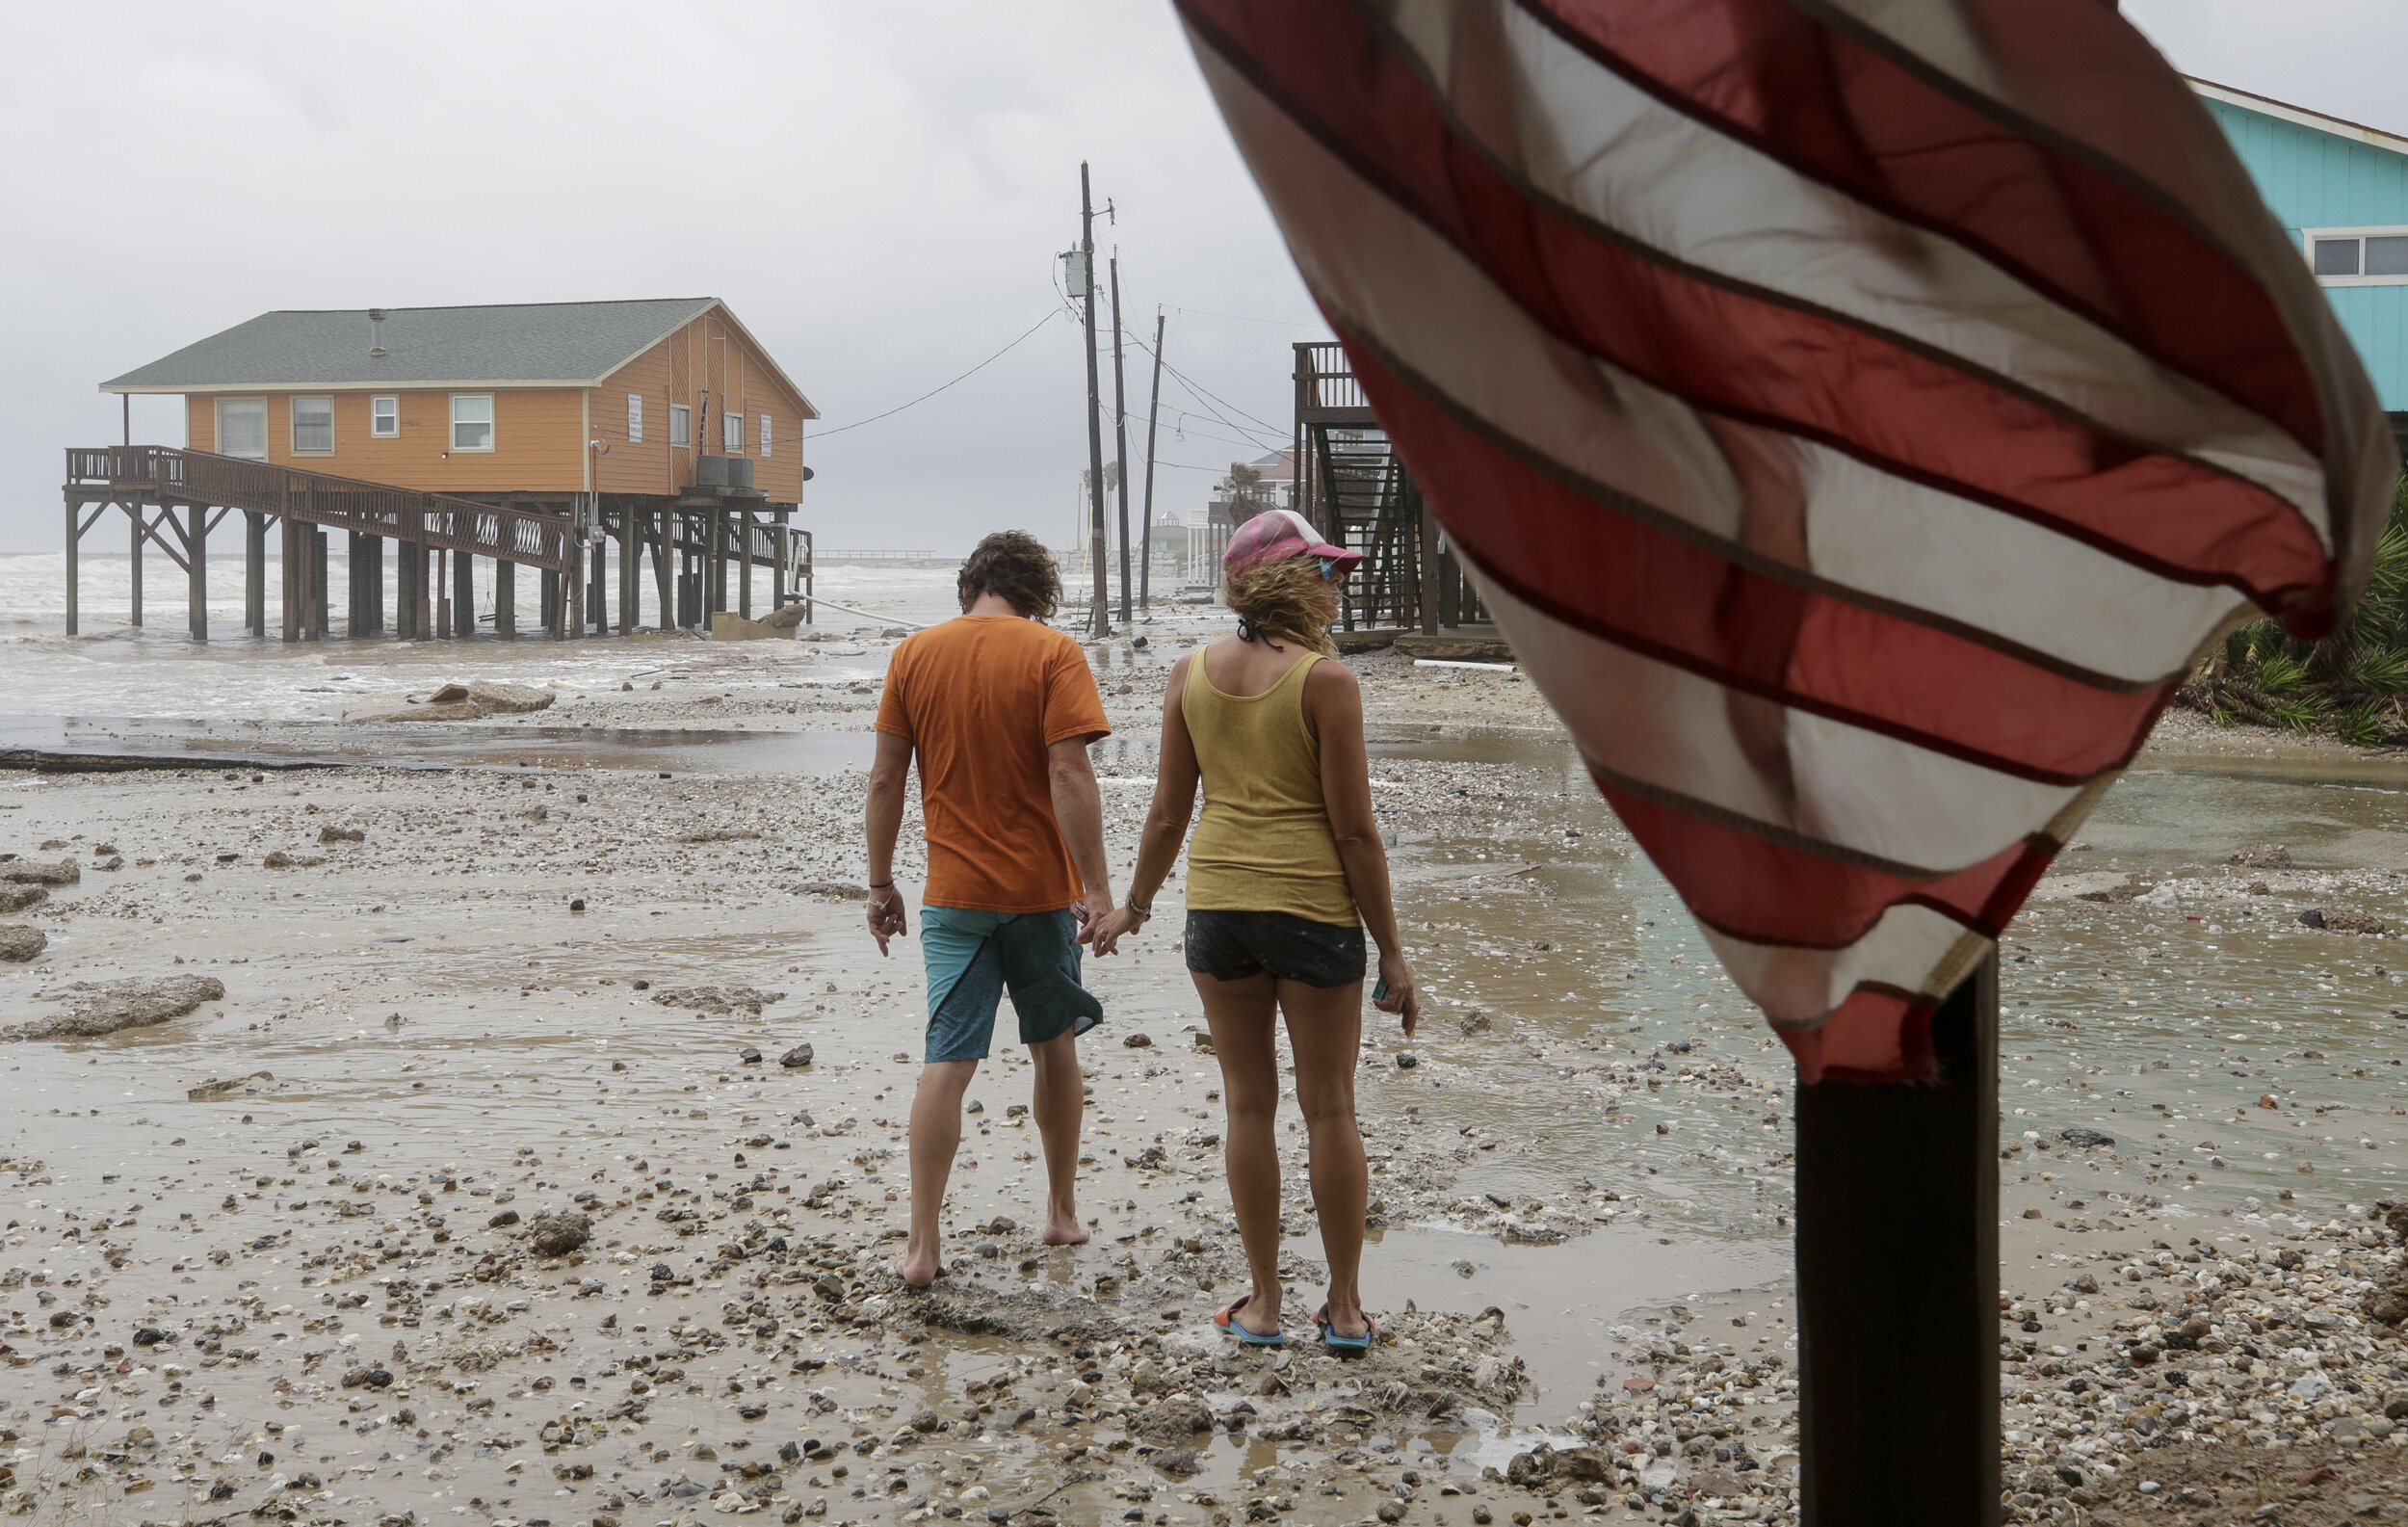  Adam Maubach, left, and Jo Dove, center, look at the erosion caused by Tropical Storm Beta on Monday, Sept. 21, 2020, in Surfside Beach, Texas. The couple said before the storm there used to be sand dunes where Thunder Road, pictured left, ended. 